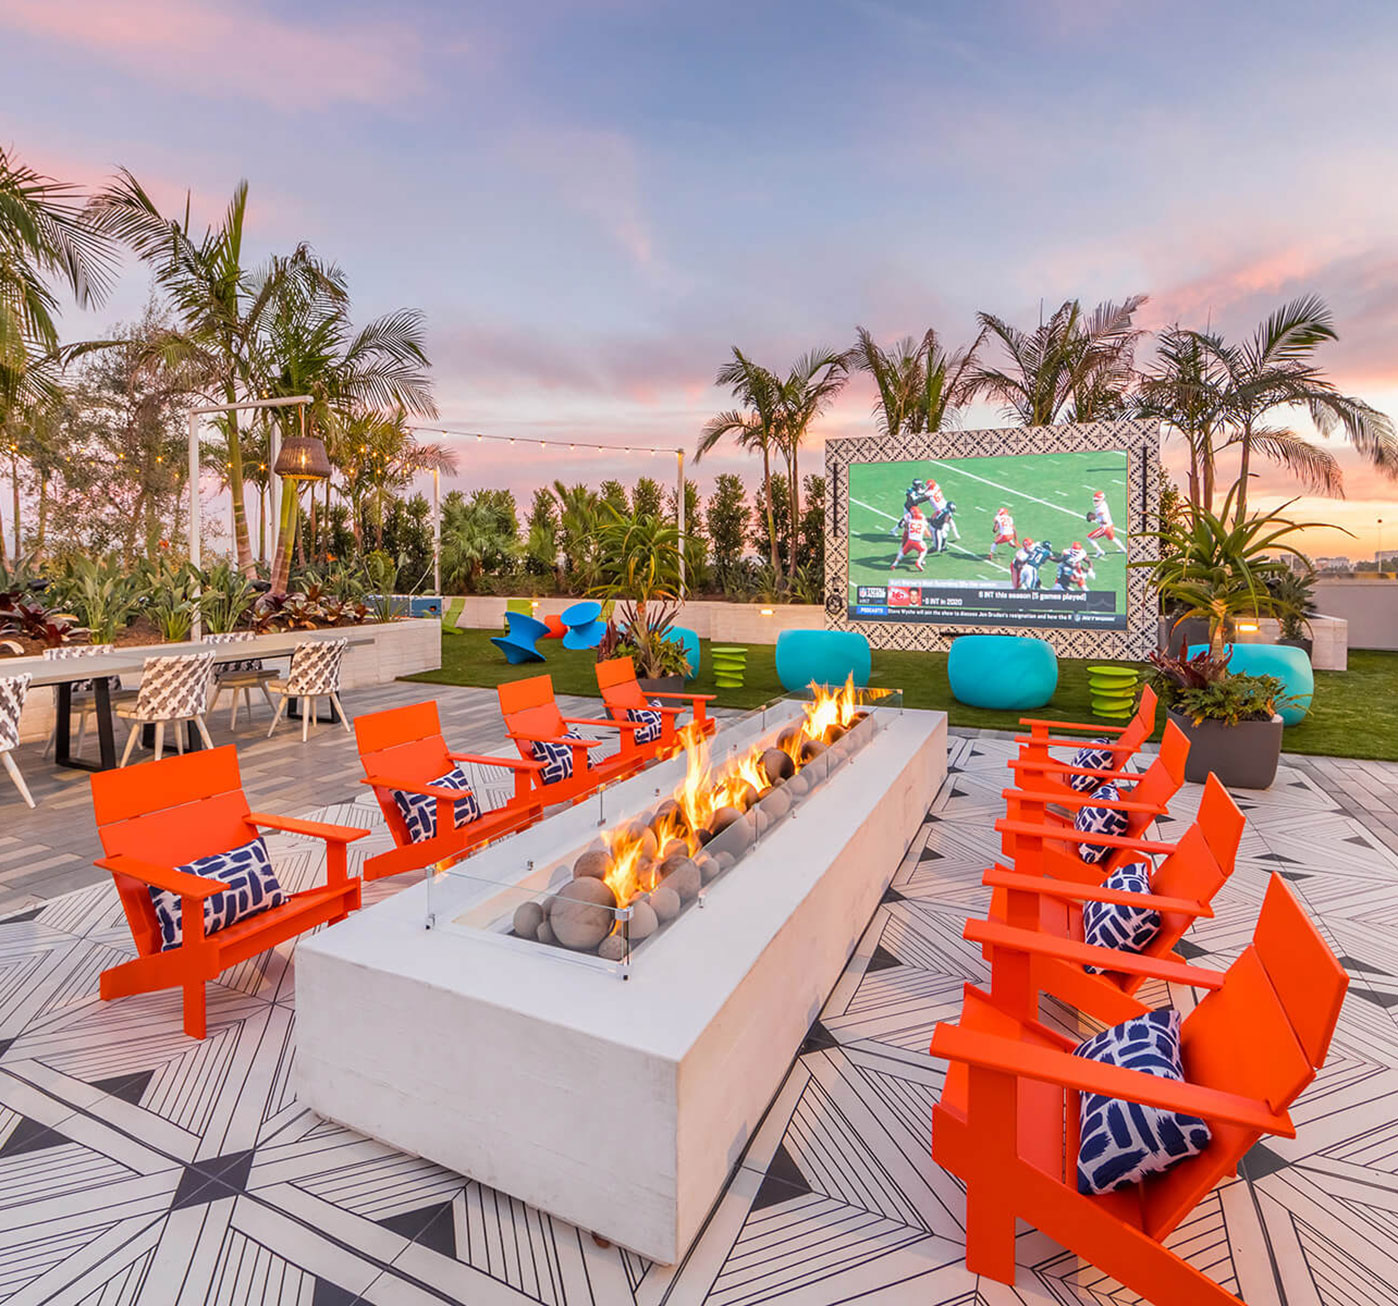 Bright lounge seating around a fire pit sits next to a large video screen on a rooftop terrace lounge surrounded by palm trees.